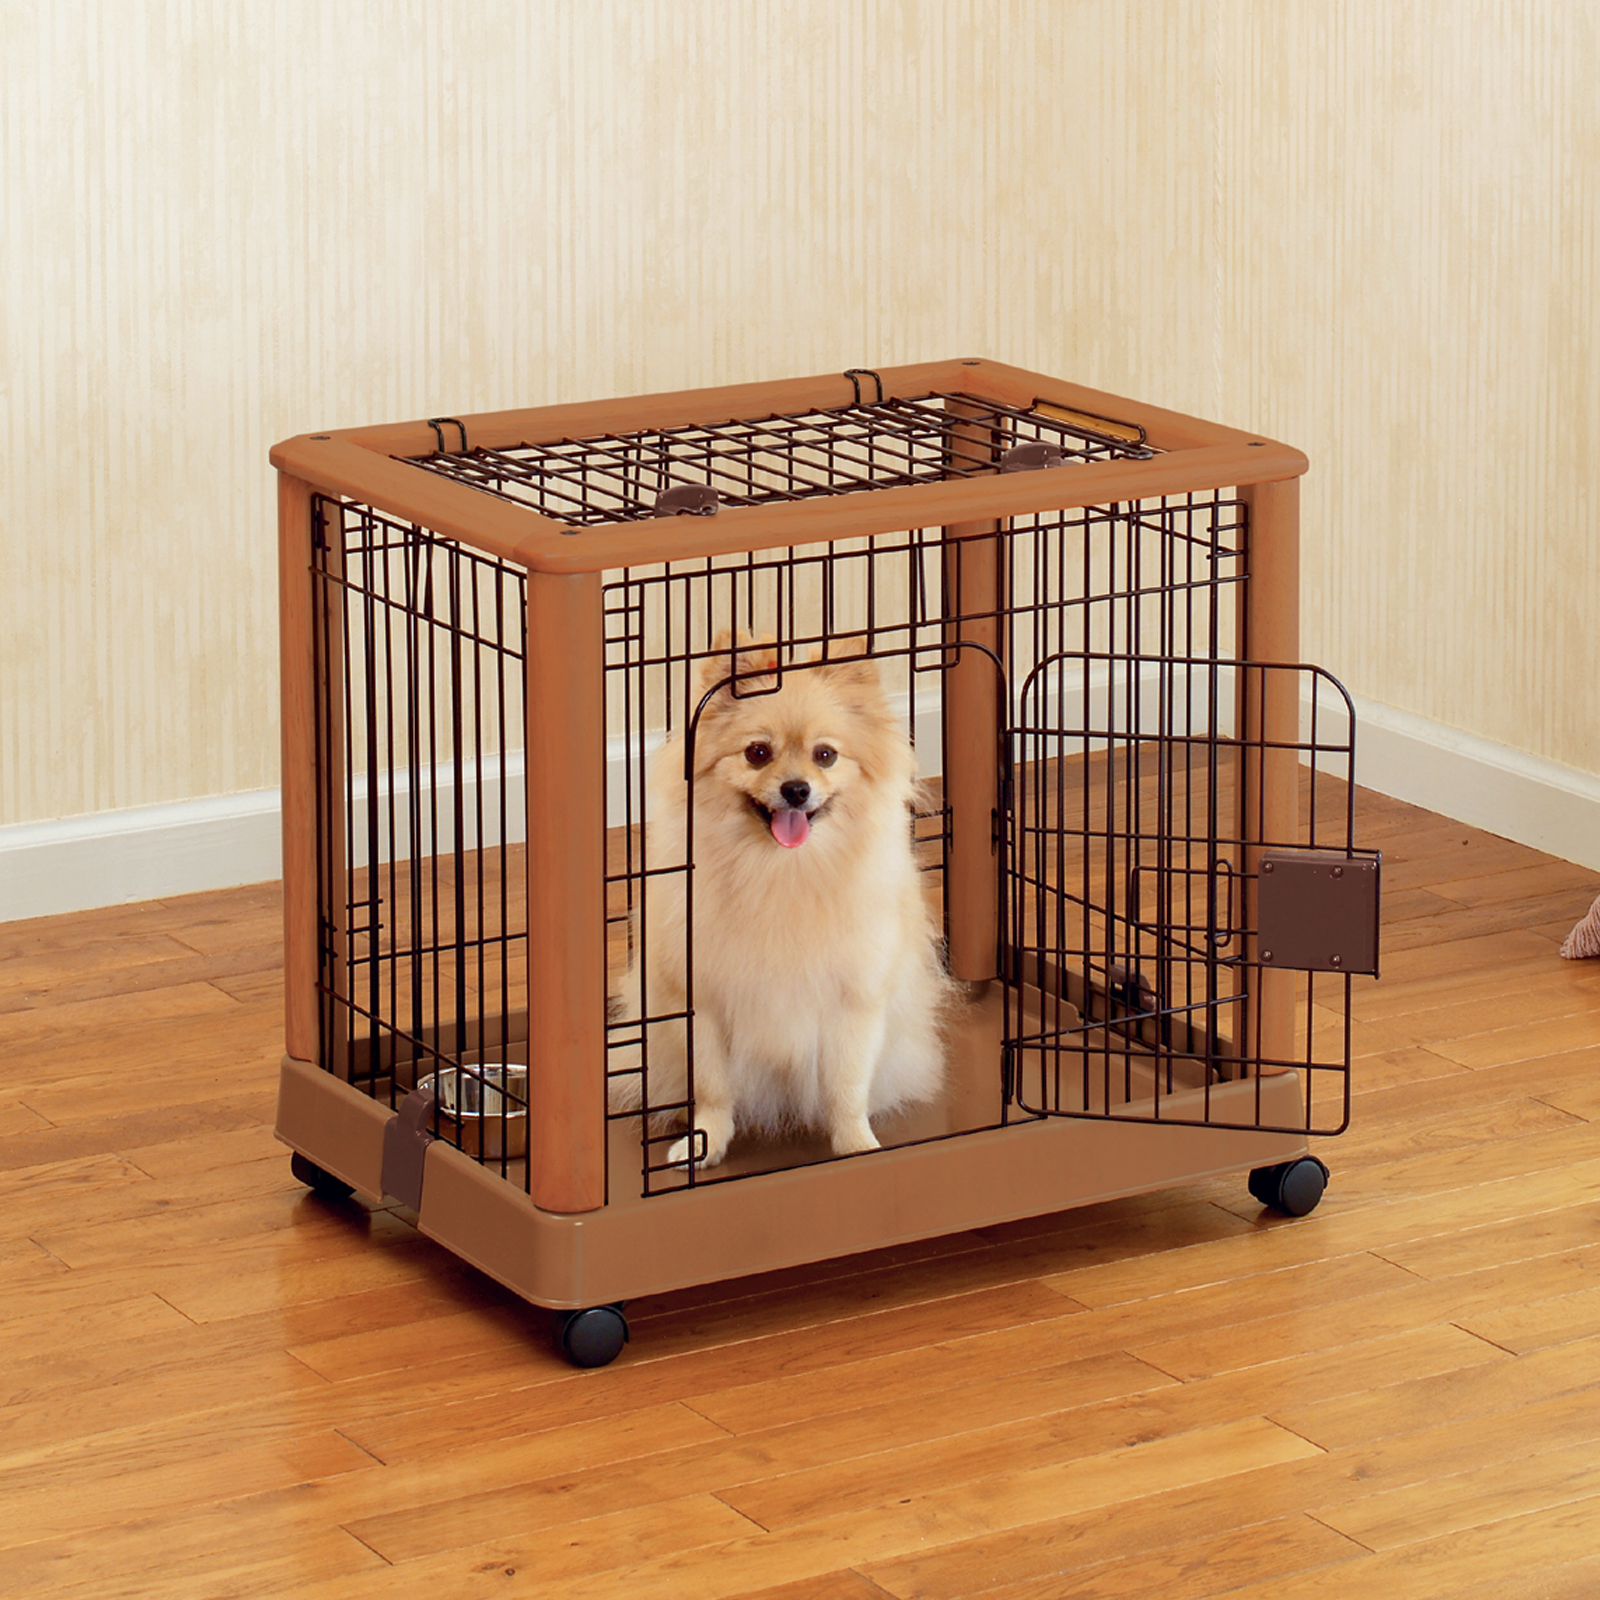 Longhair Chihuahua in dog grate